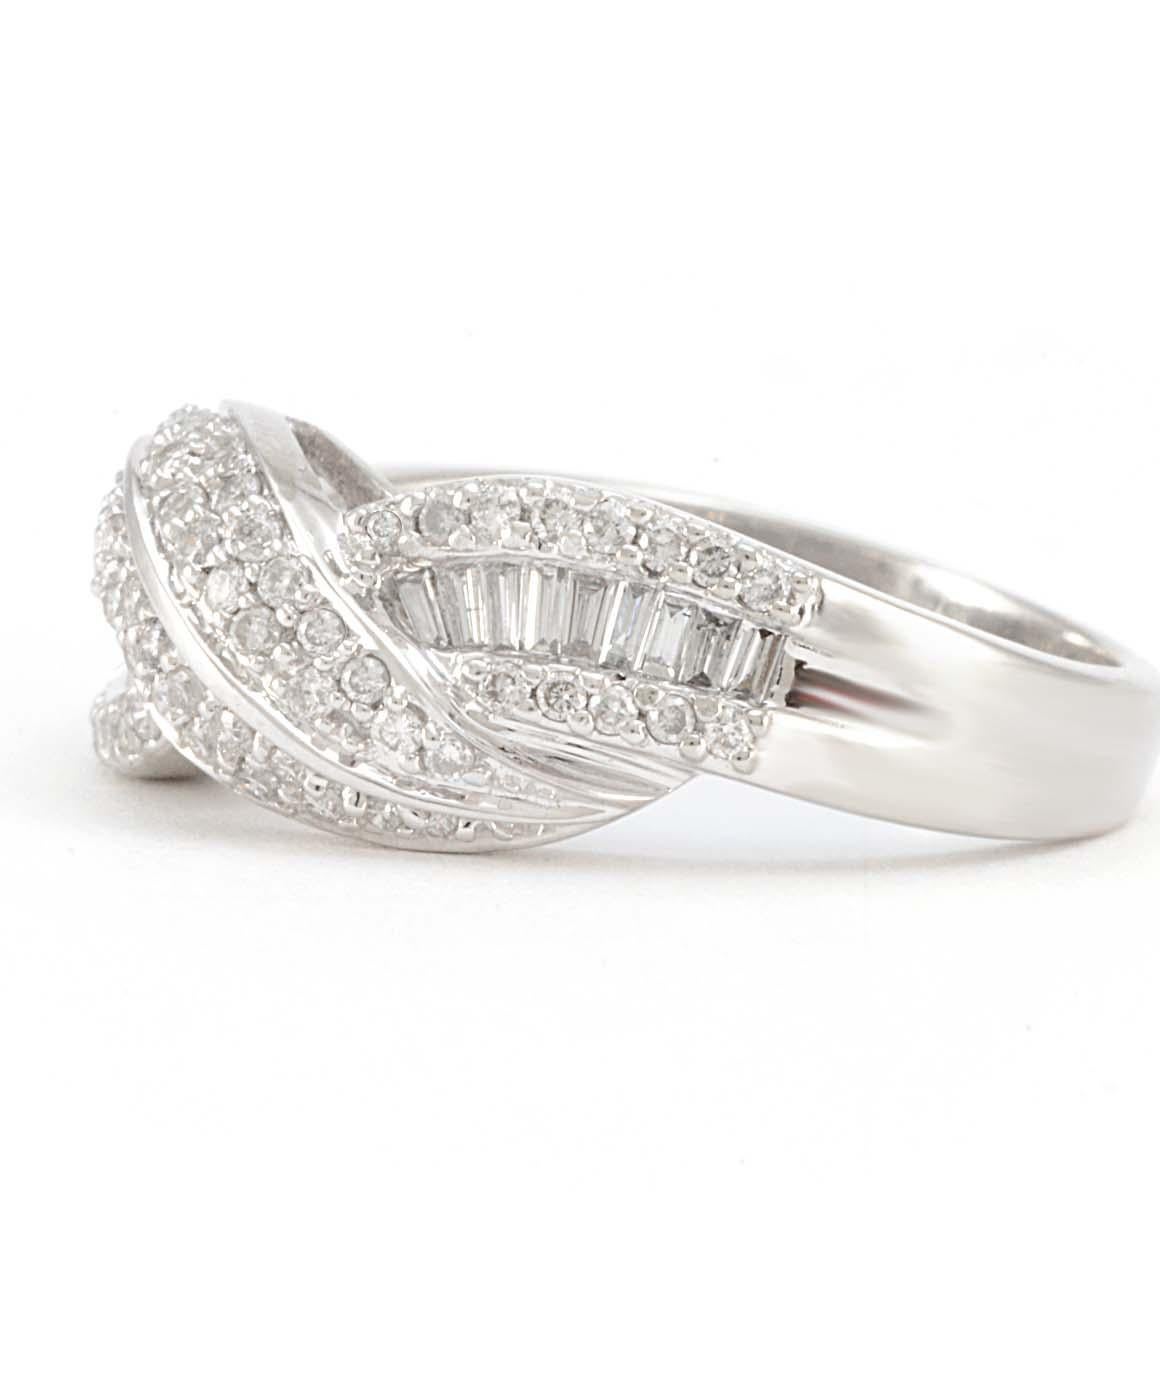 Excellent condition. This twisted band in 14k white gold features 60 genuine round diamonds and 18 genuine baguette diamonds. The ring is a size 7.25 and weighs 4.2 grams.